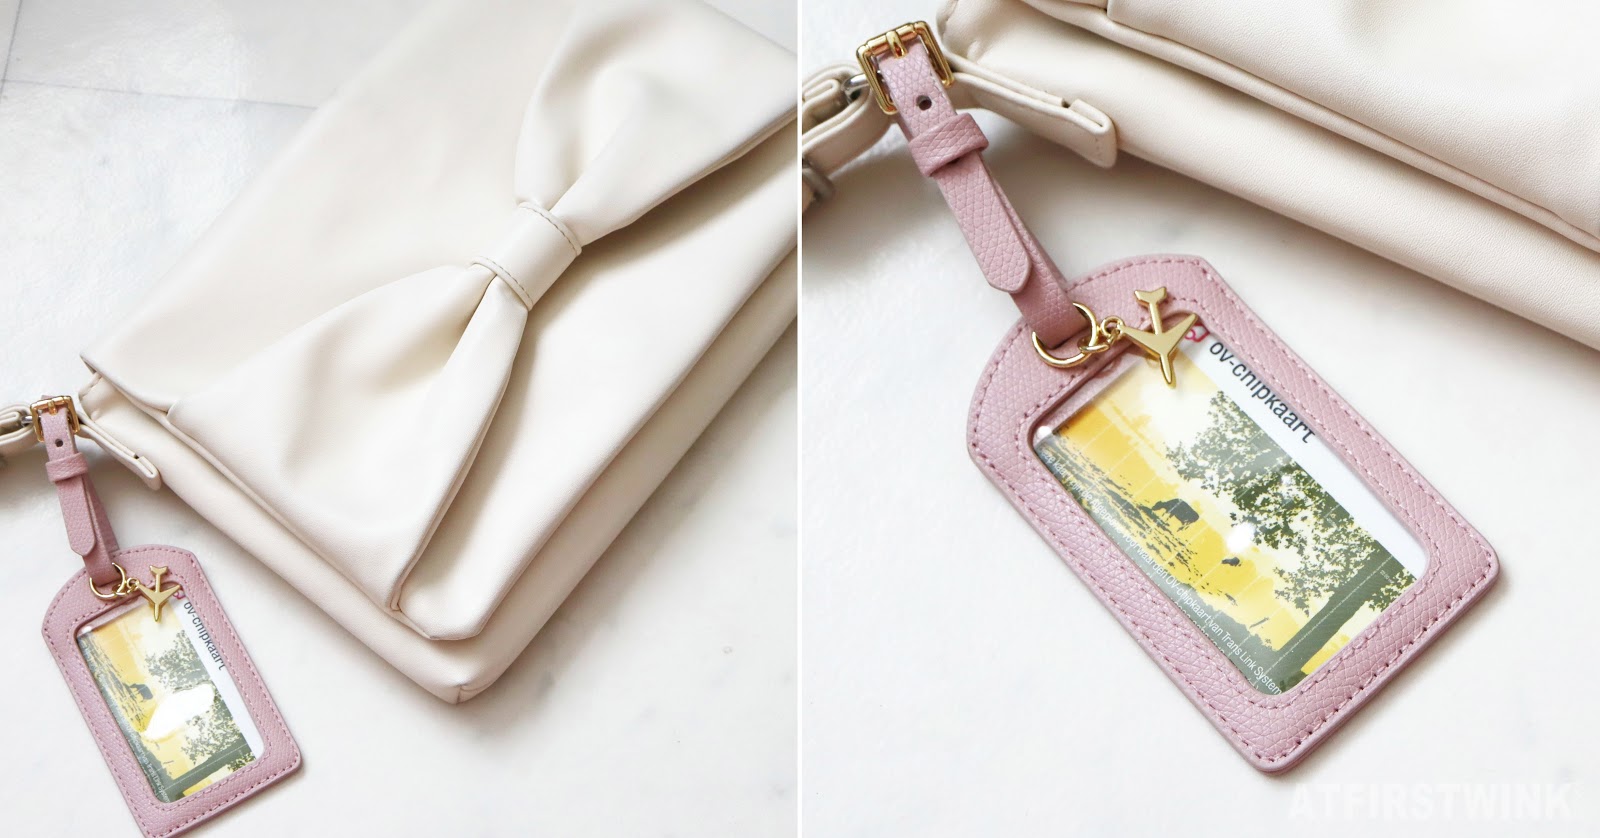 H&M luggage tag used as public transport card holder pink beige bow bag